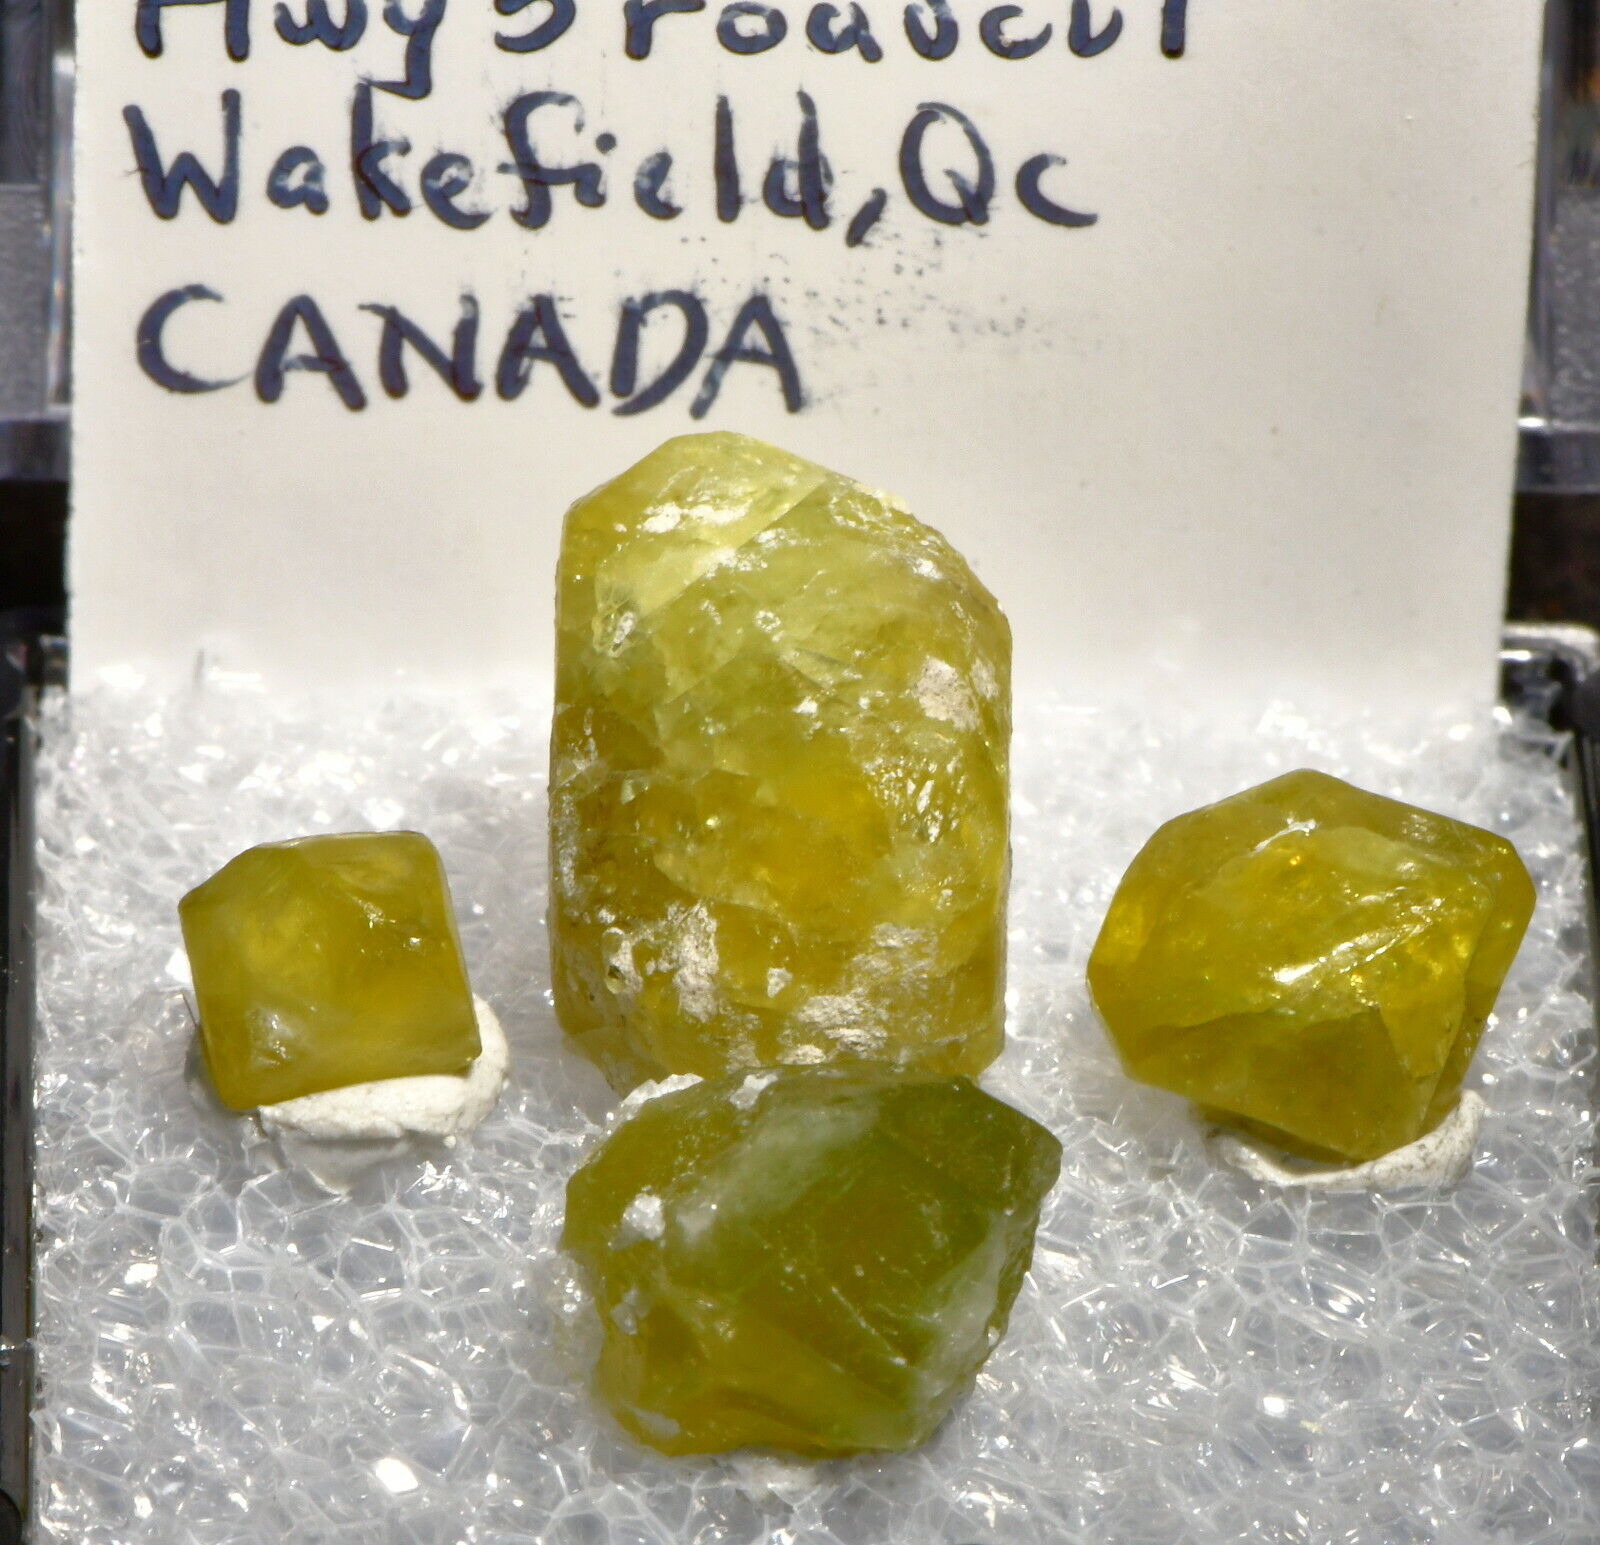 GRENVILLE PROVINCE DIOPSIDE CRYSTALS, HWY 5 ROADCUT. WAKEFIELD, QUEBEC, CANADA 5